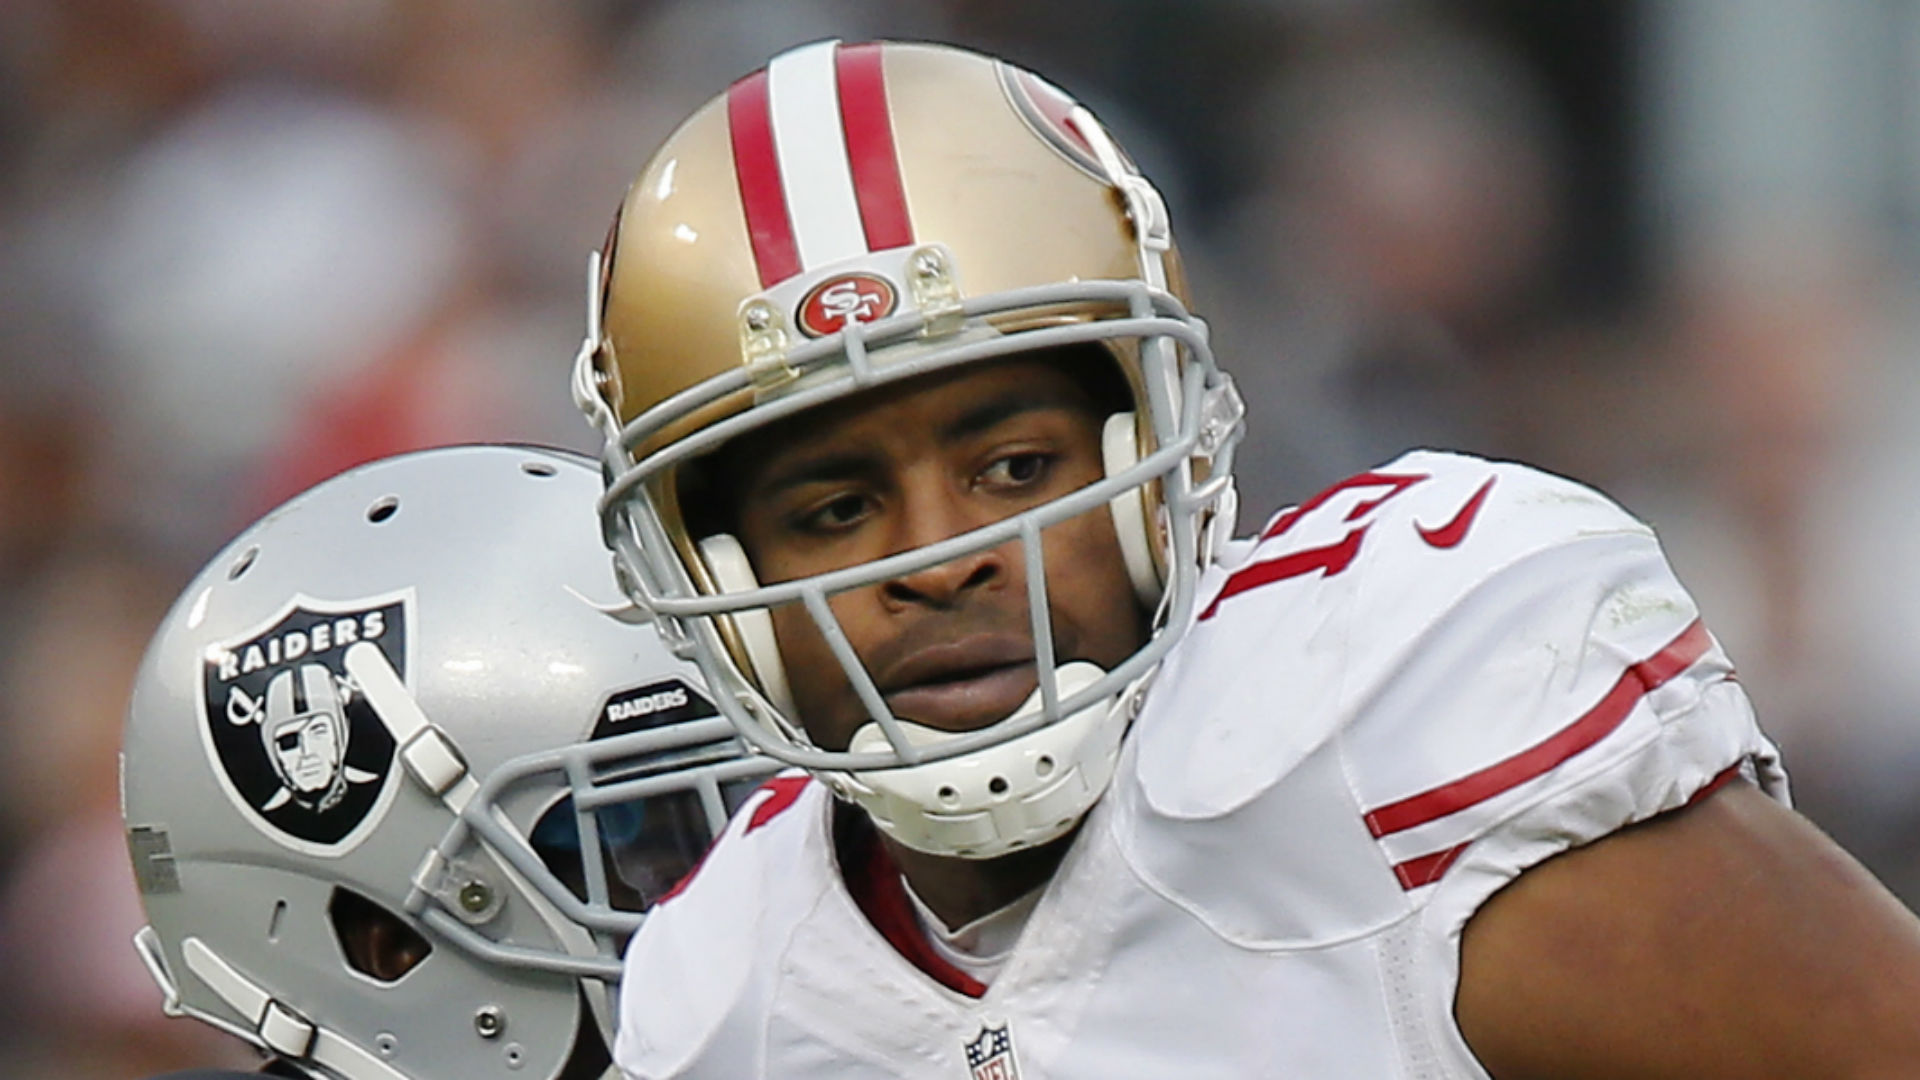 Raiders sign former 49ers receiver Michael Crabtree